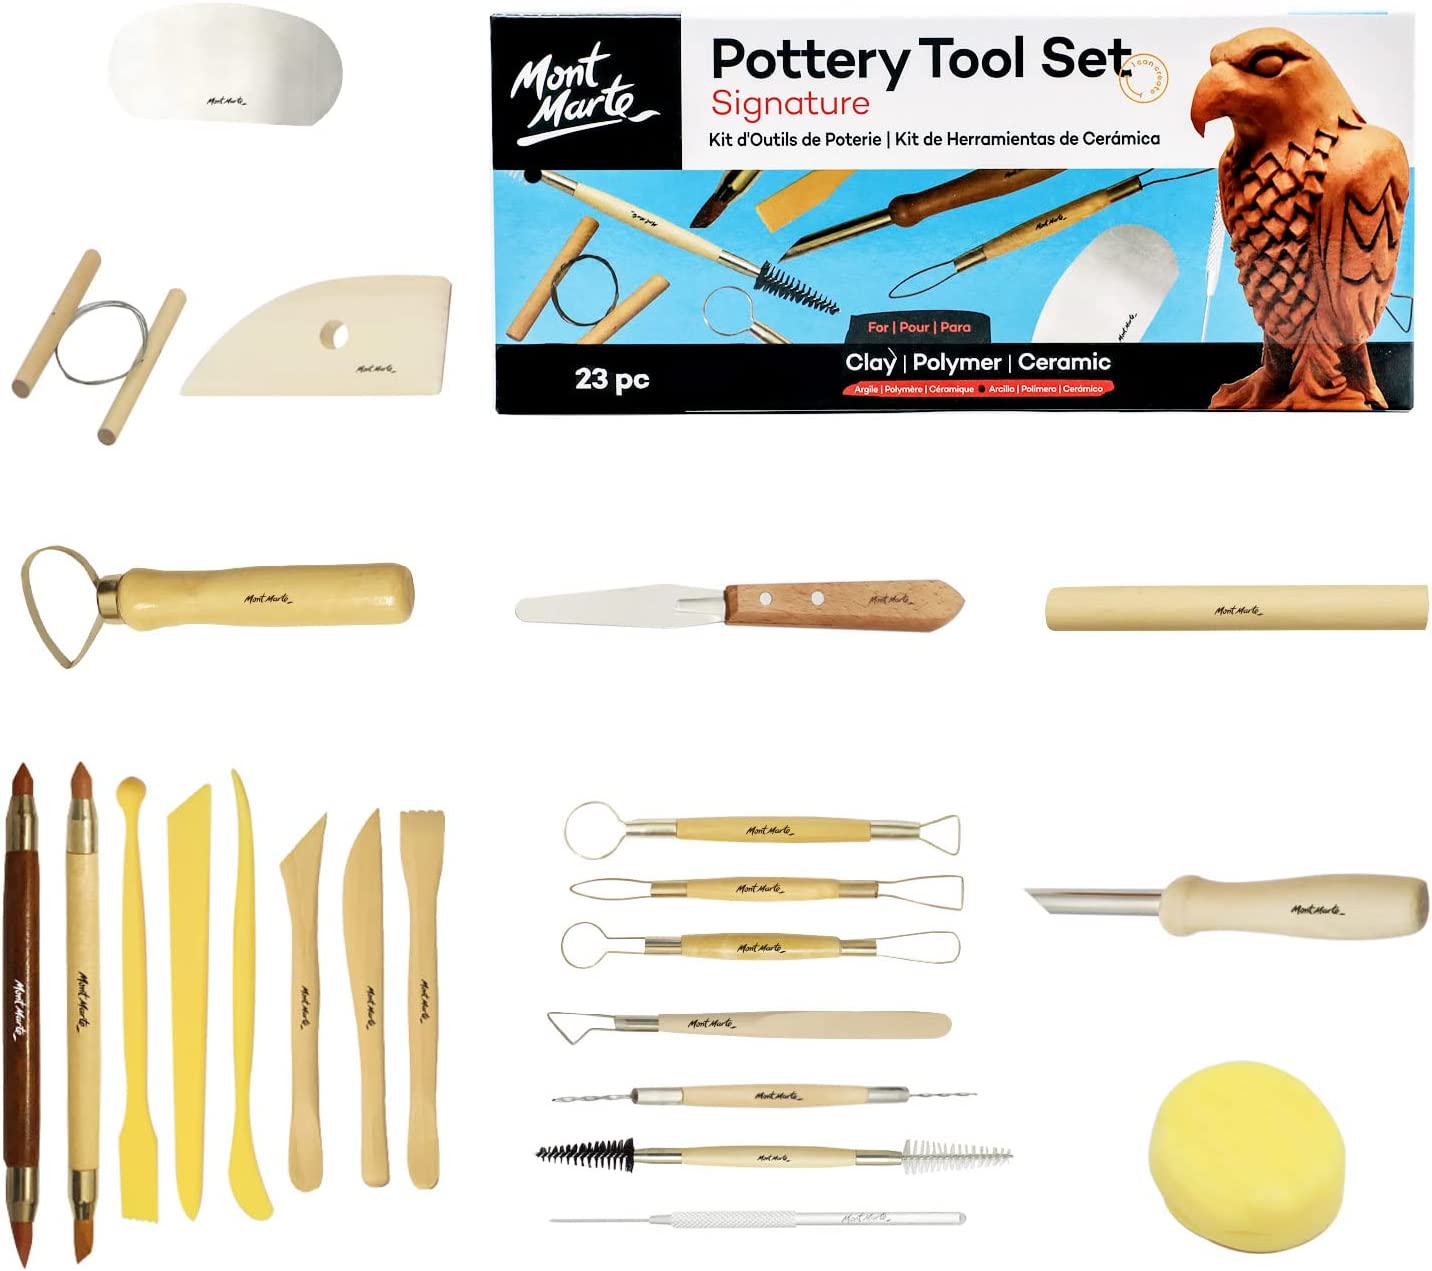 https://craftyarts.co.za/wp-content/uploads/2023/05/Pottery-Tool-Set-Mont-Marte-Box-and-Contents.jpg